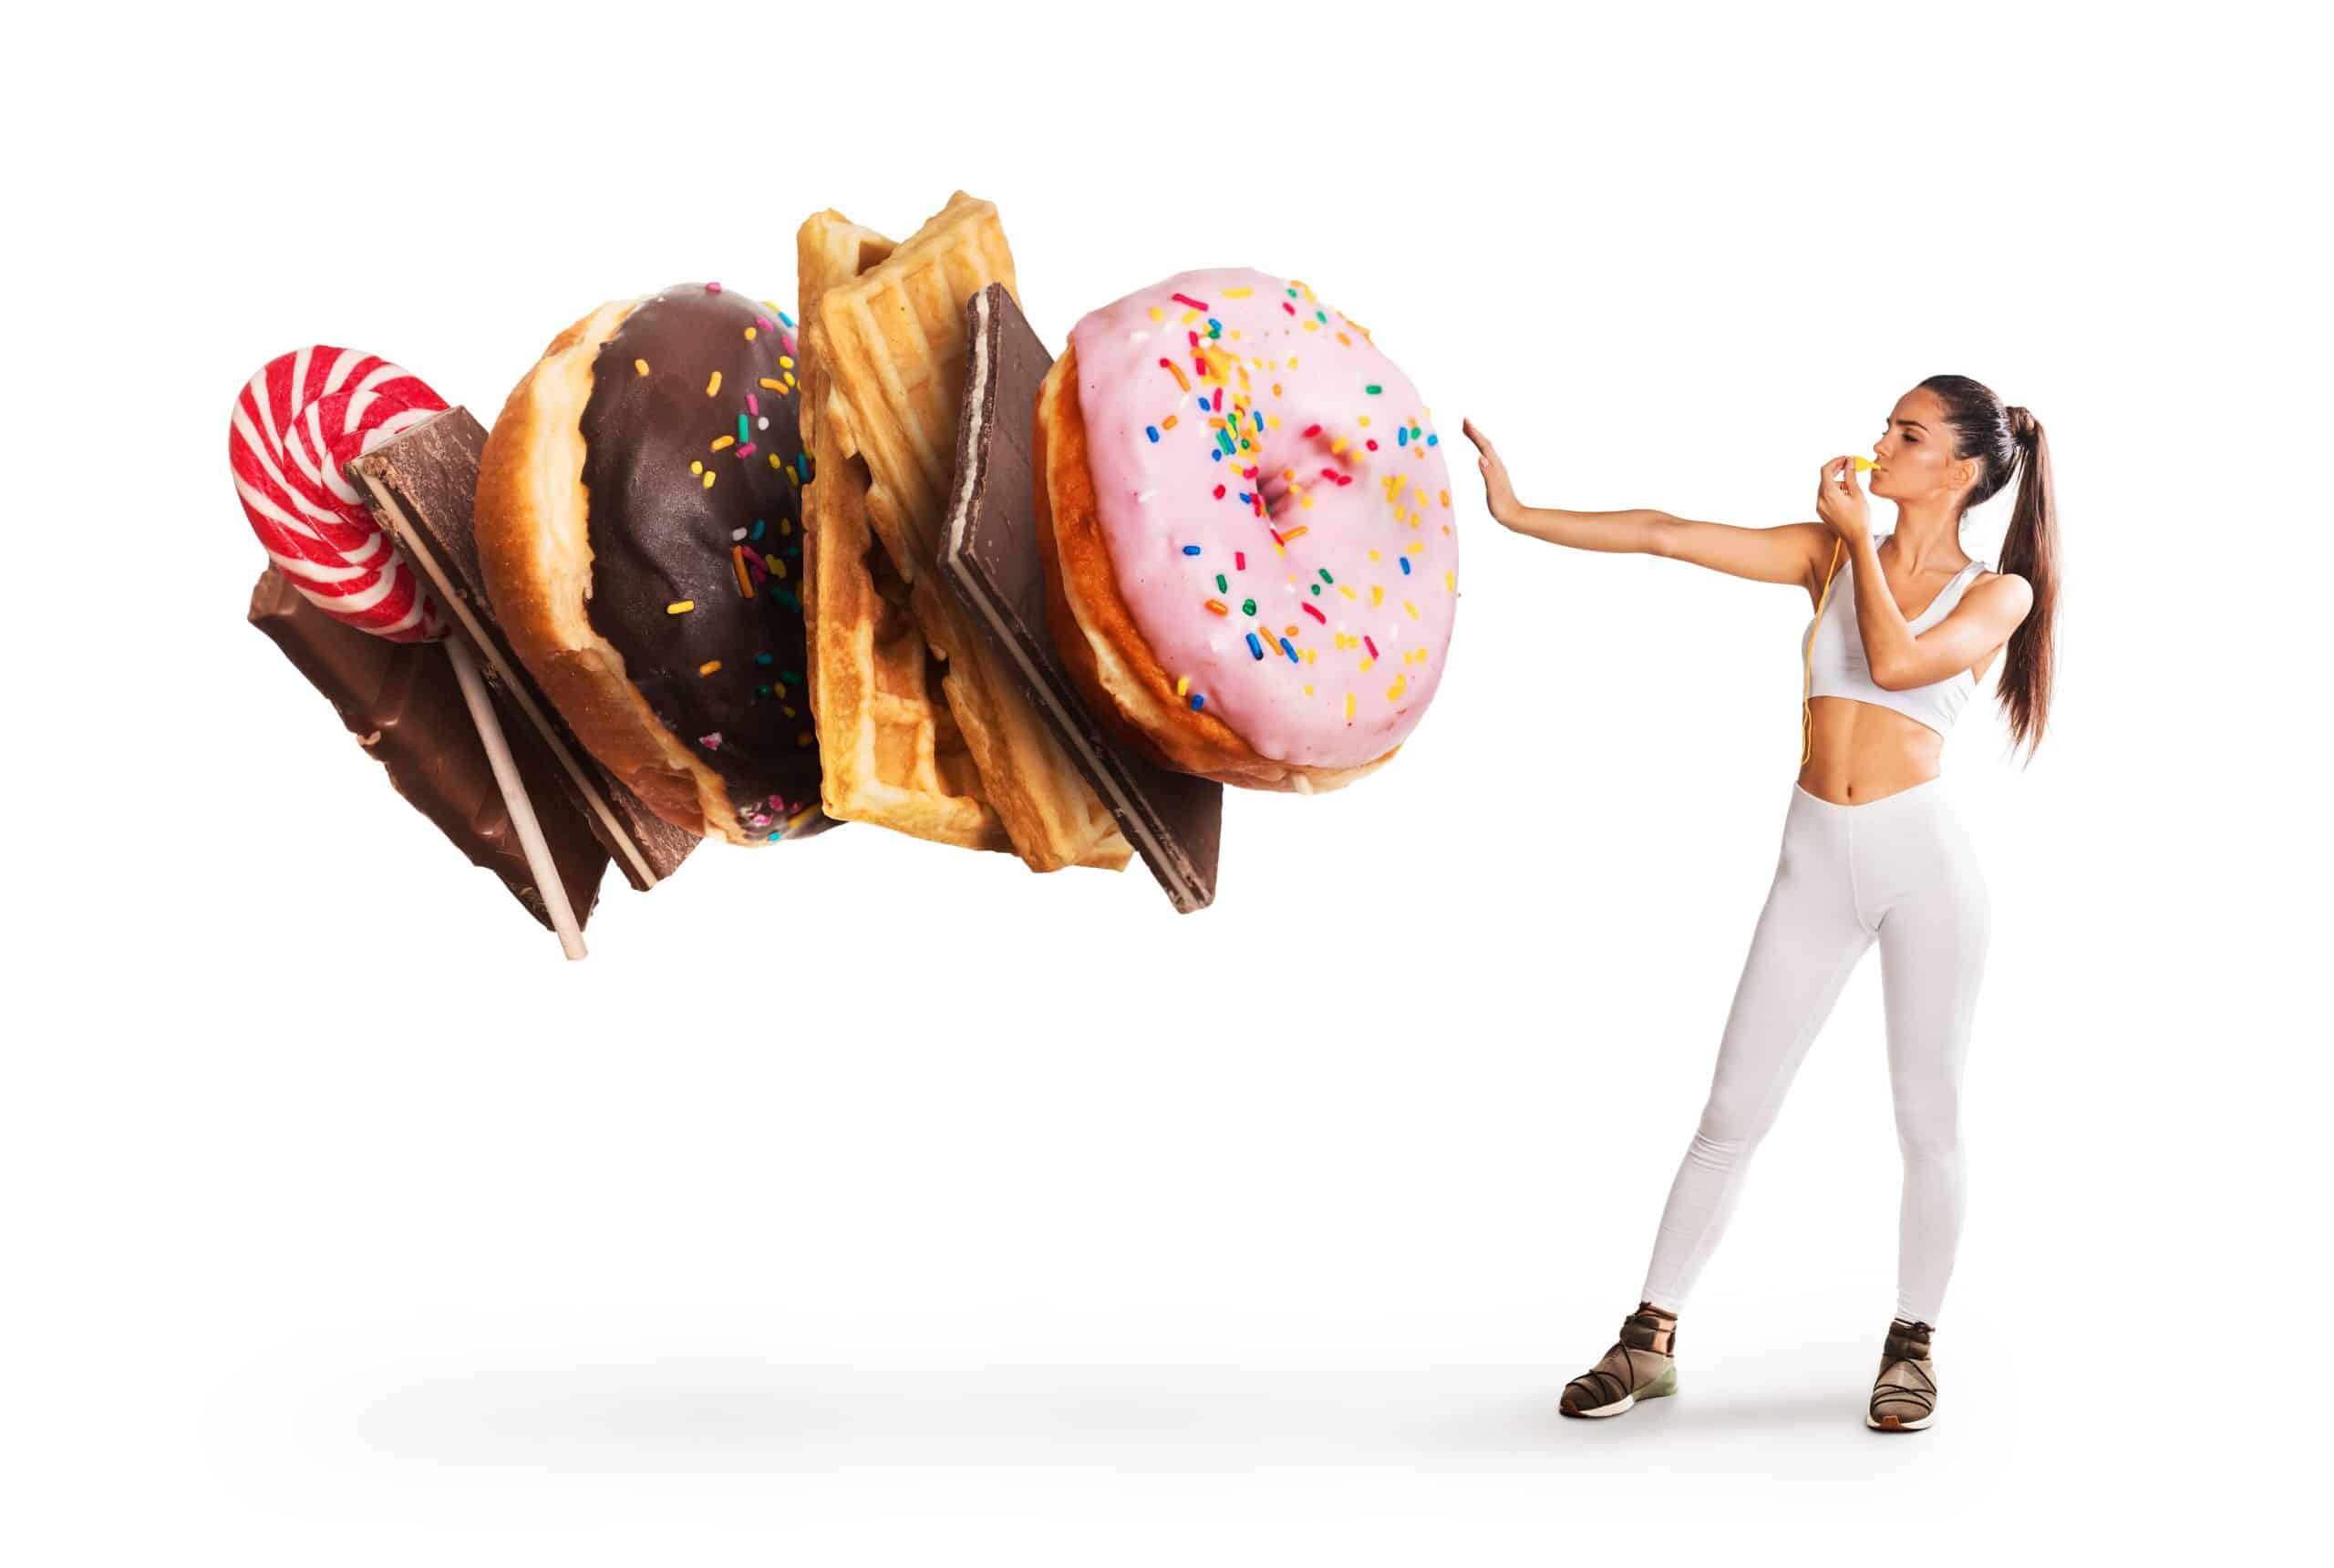 Sugar Is Bad For Health - Kick The Sugar Habit And Reap The Rewards